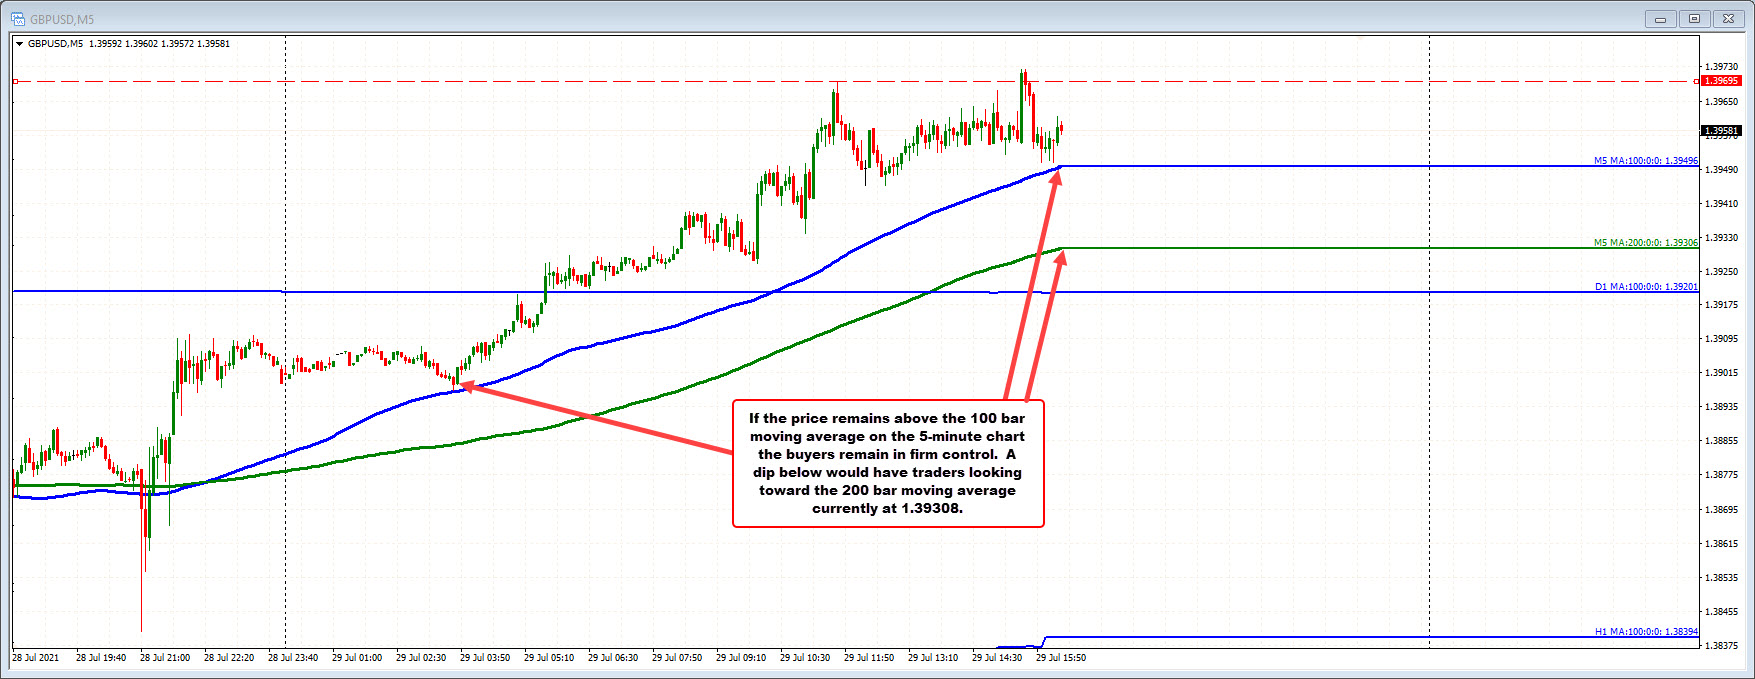 GBPUSD stays above the 100 bar moving average on the five minute chart